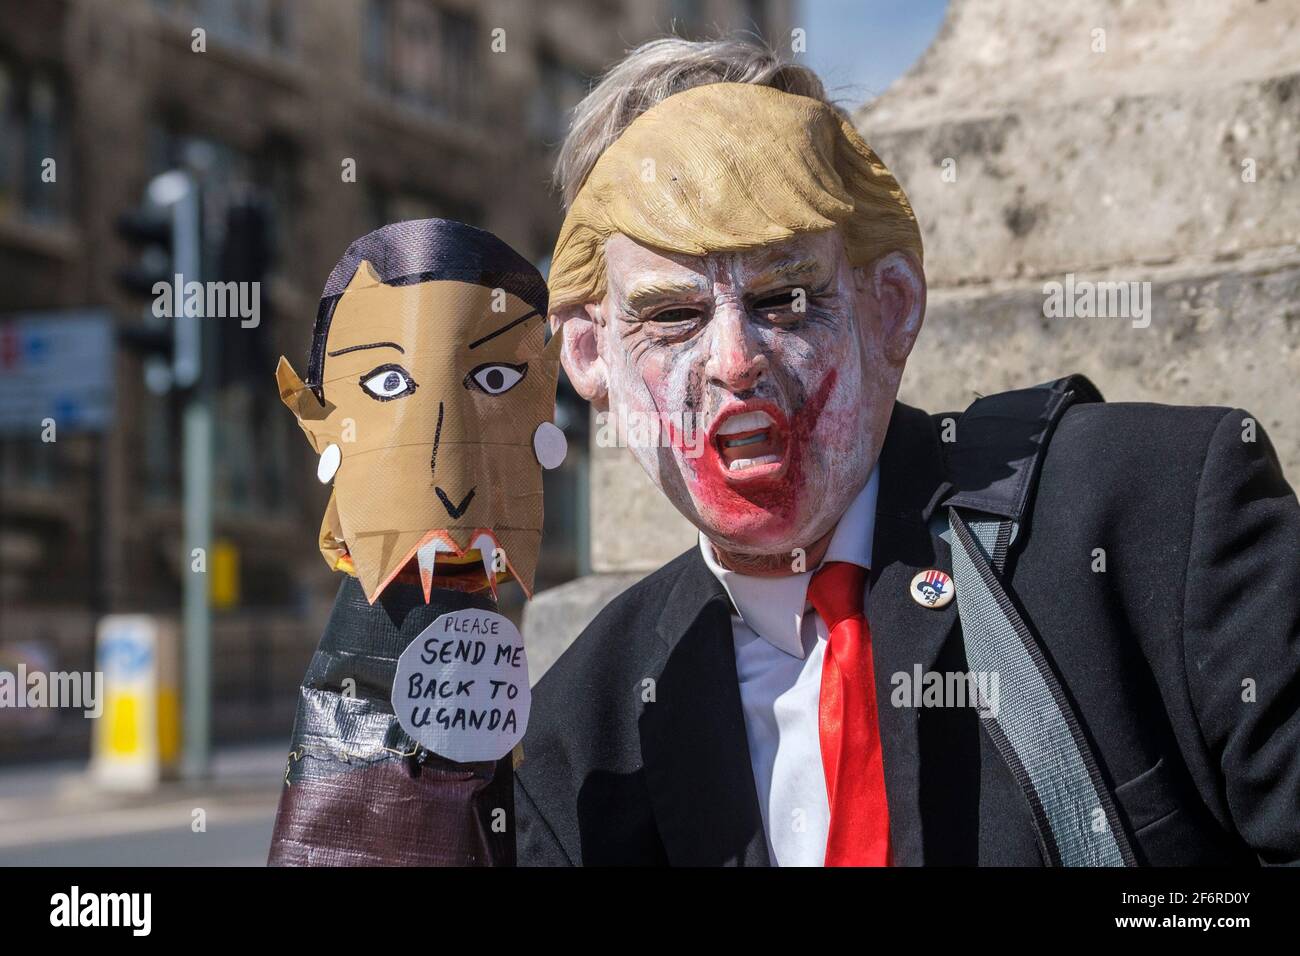 London, UK. 2nd Apr 2021. A protestor at ‘Kill The Bill’ protest against the Police, Crime, Sentencing and Courts Bill, in Leeds, north of England on Good Friday, April 2nd, 2021. Credit: Mark Harvey/Alamy Live News Stock Photo